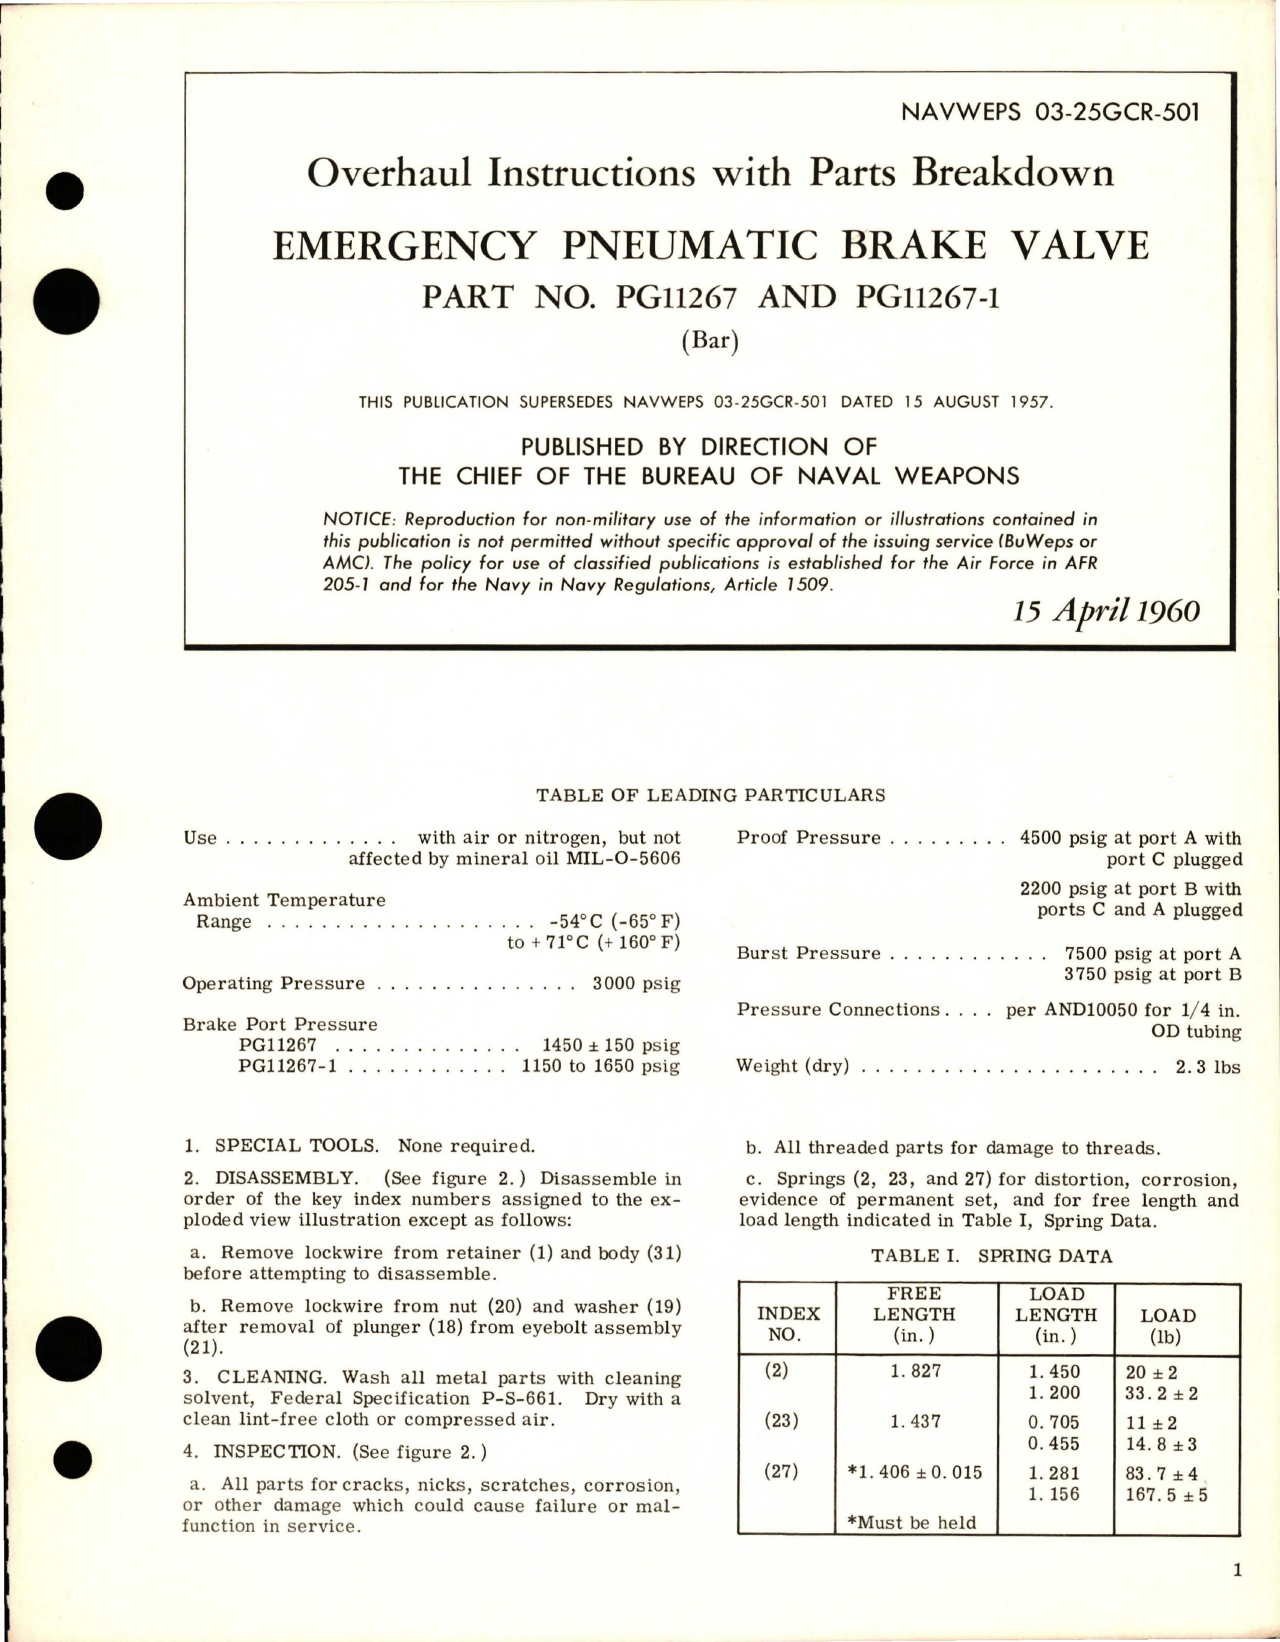 Sample page 1 from AirCorps Library document: Overhaul Instructions with Parts Breakdown for Emergency Pneumatic Brake Valve - Parts PG11267 and PG11267-1 